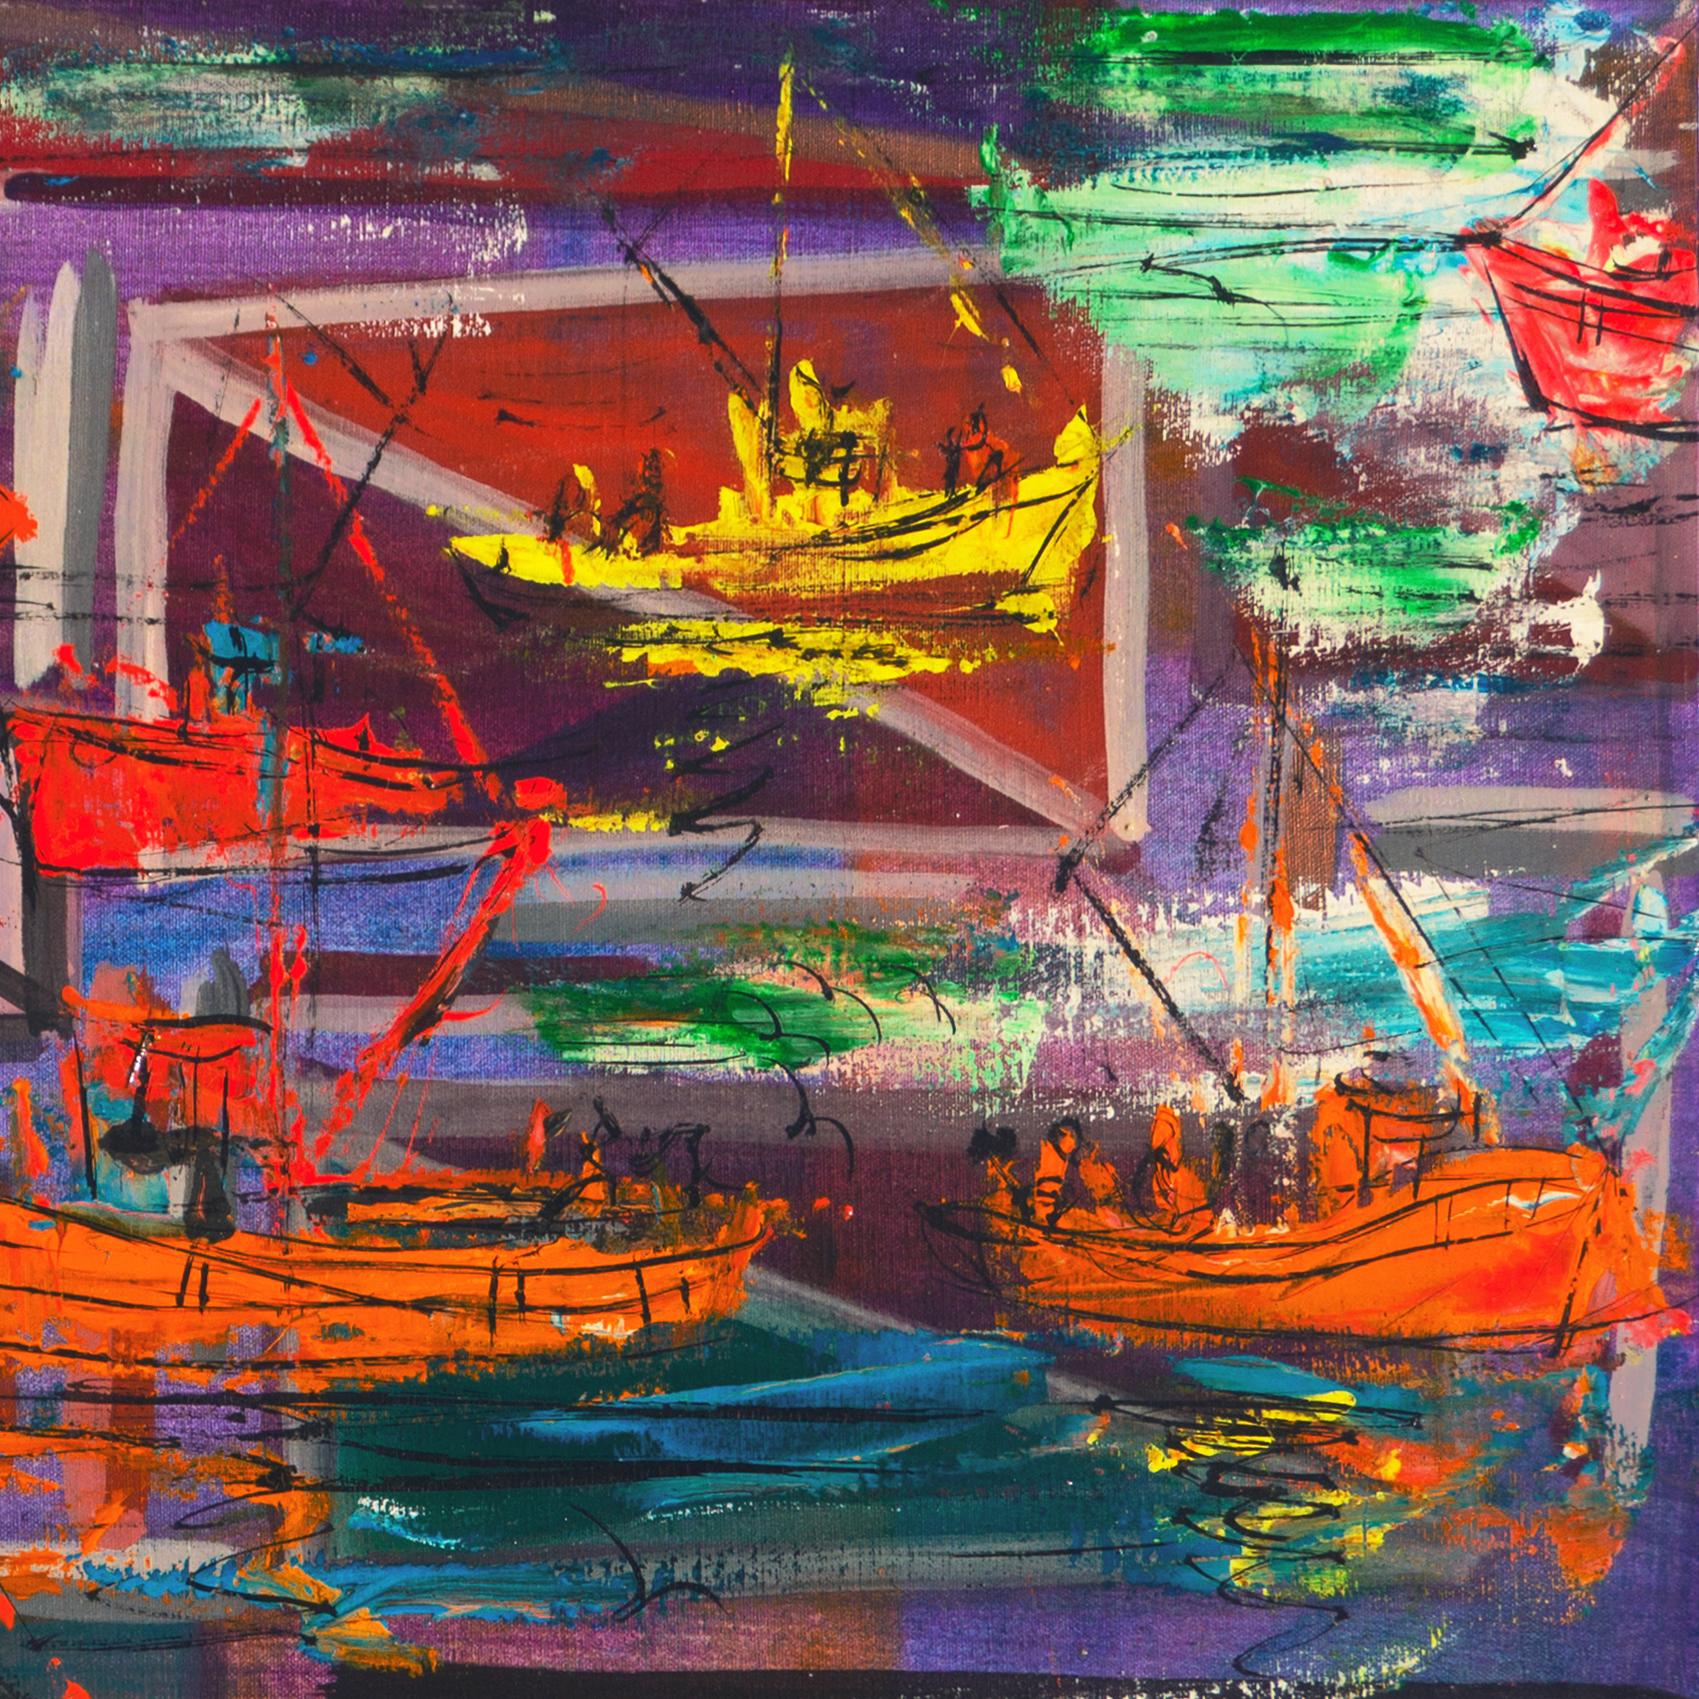 'Fishing Boats', Sausalito, North Beach, San Francisco Bay Area Expressionist For Sale 1